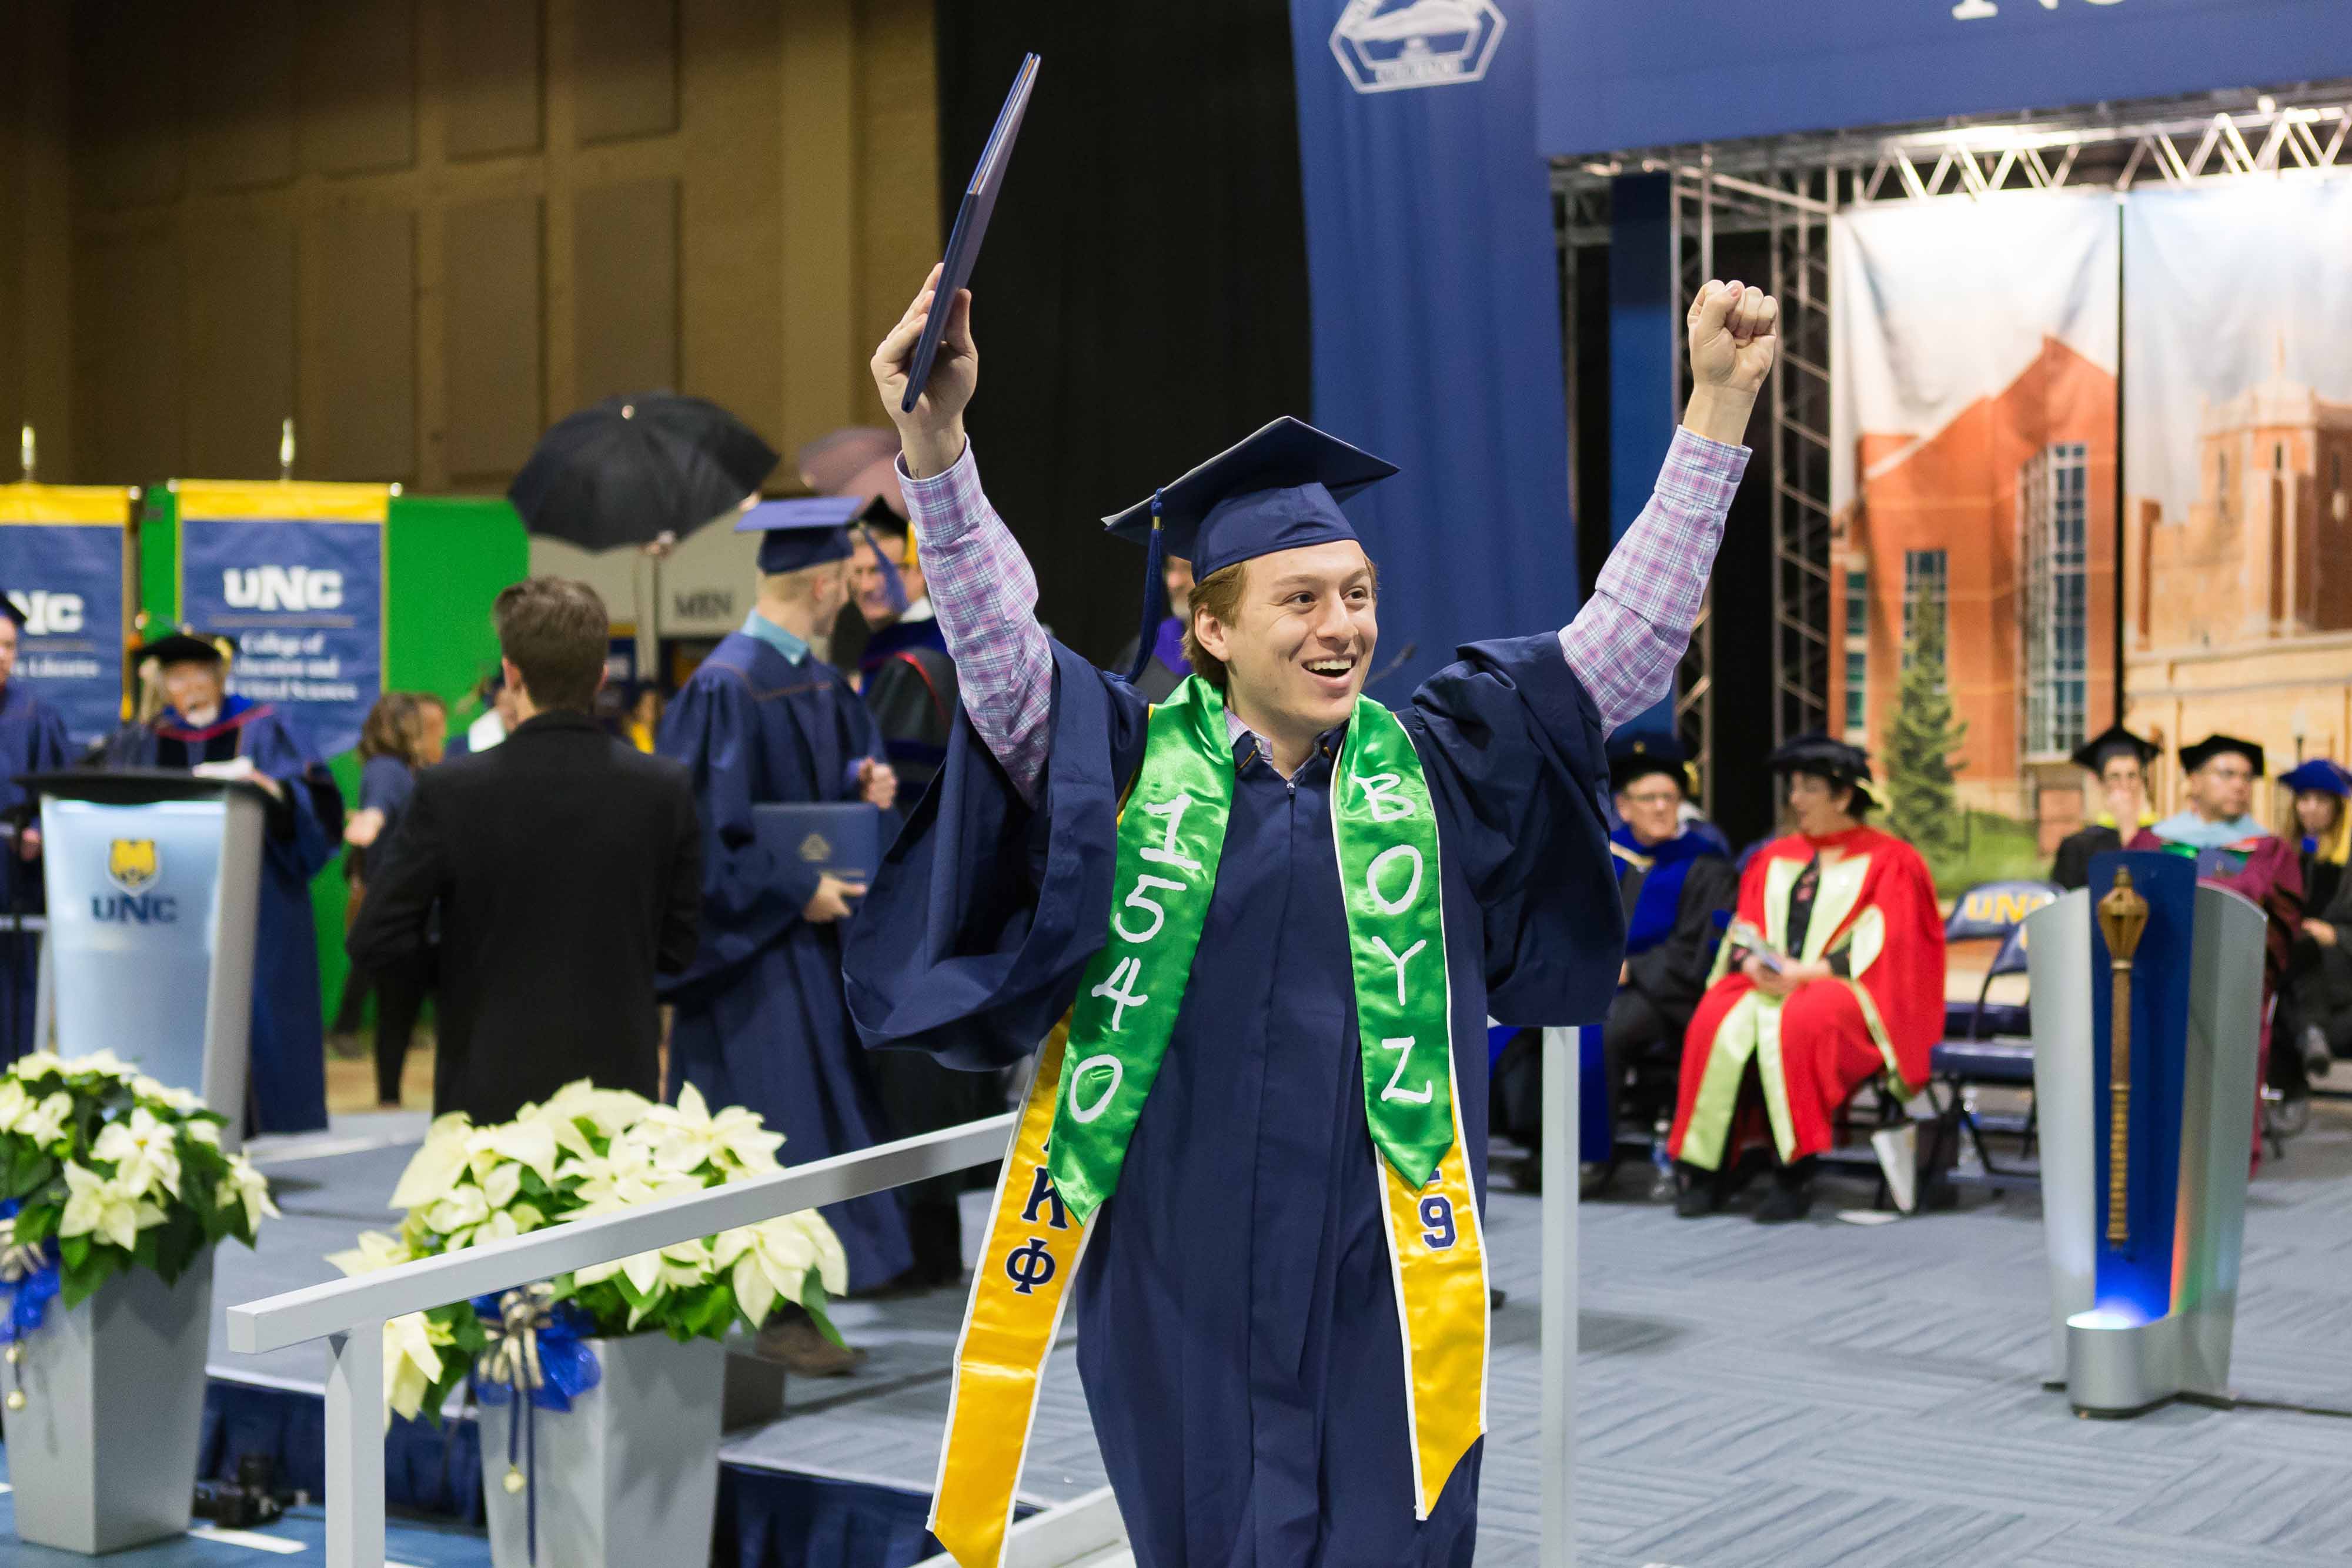 Student holds their diploma above their head.